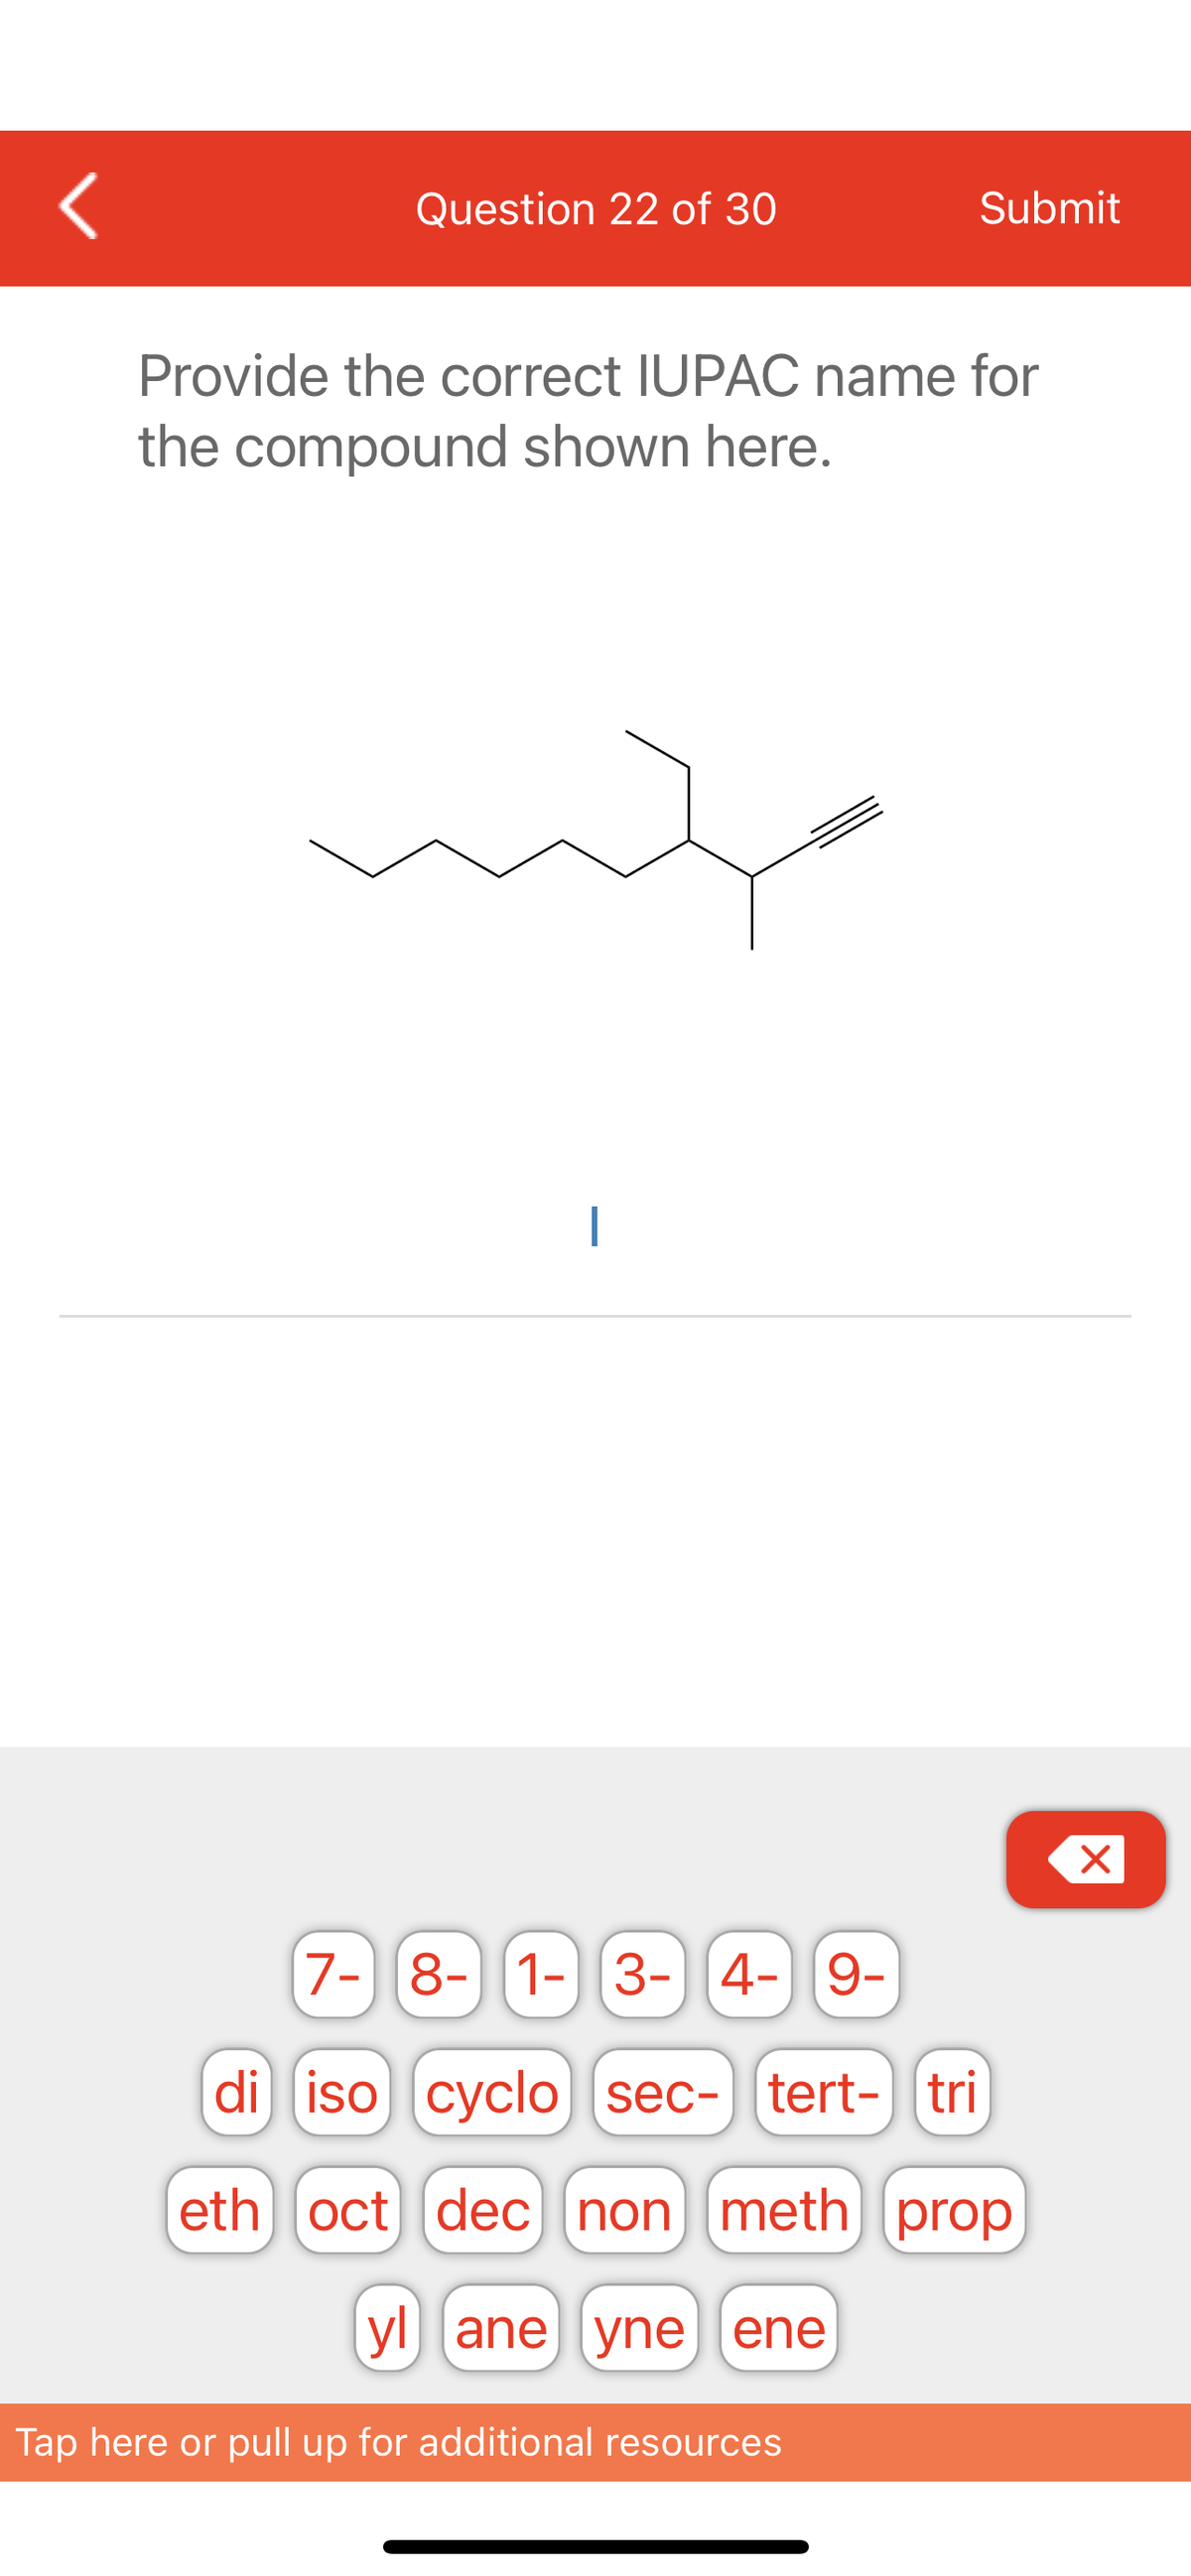 <
Question 22 of 30
Submit
Provide the correct IUPAC name for
the compound shown here.
7- 8- 1- 3- 4- 9-
di iso cyclo sec- tert- tri
eth oct dec non meth] prop
yl ane yne ene
Tap here or pull up for additional resources
X